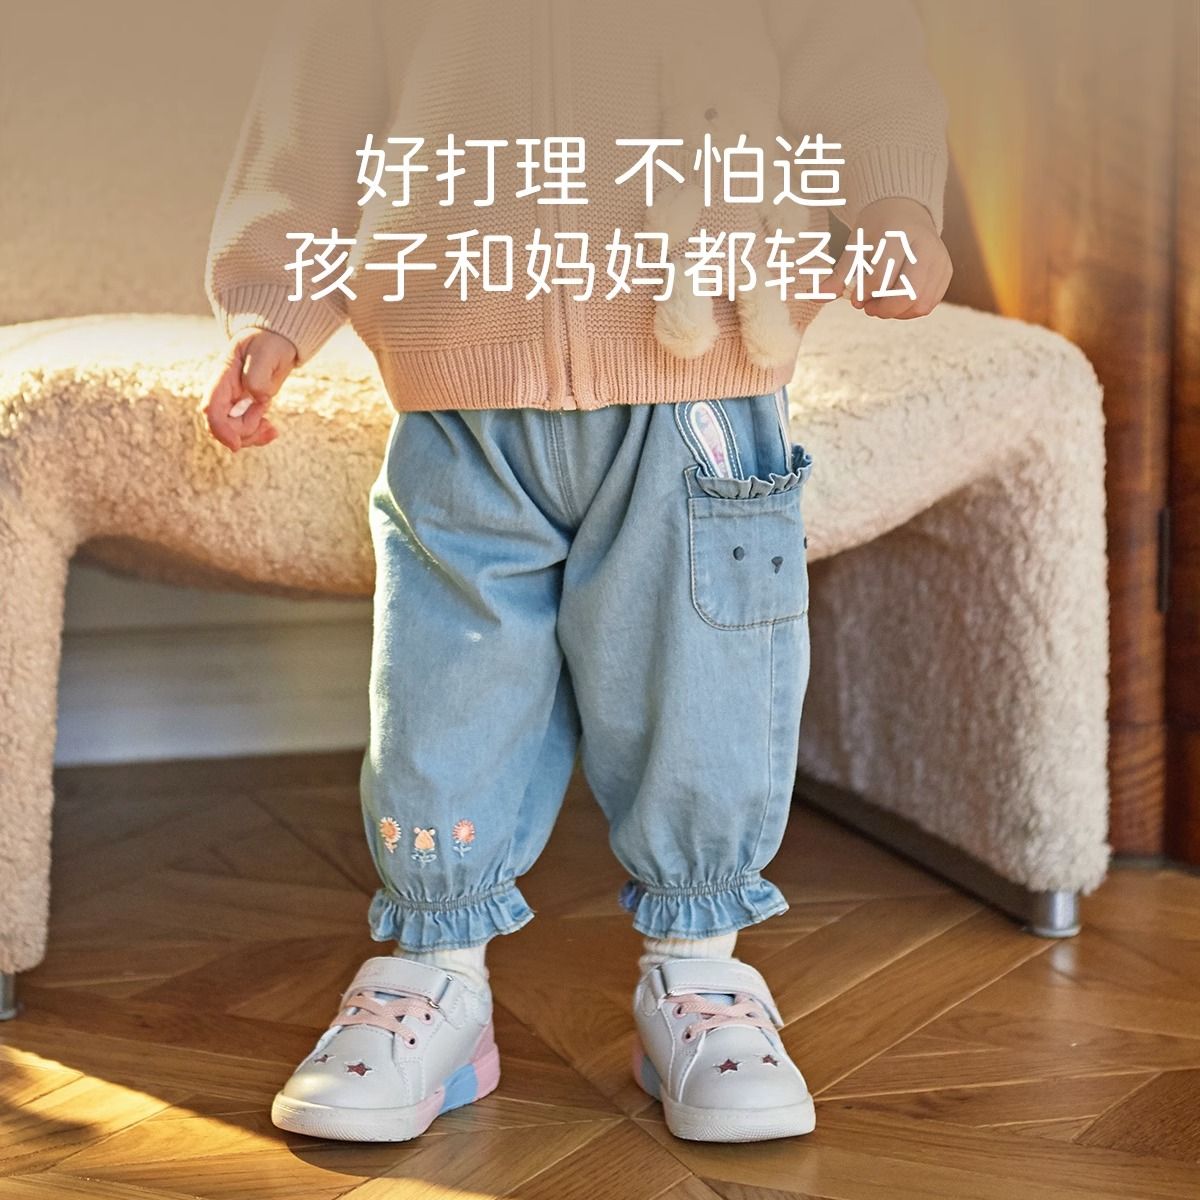 Girls' pure cotton jeans 2023 autumn new style children's fashionable pants girls' casual trousers elastic waist children's clothing